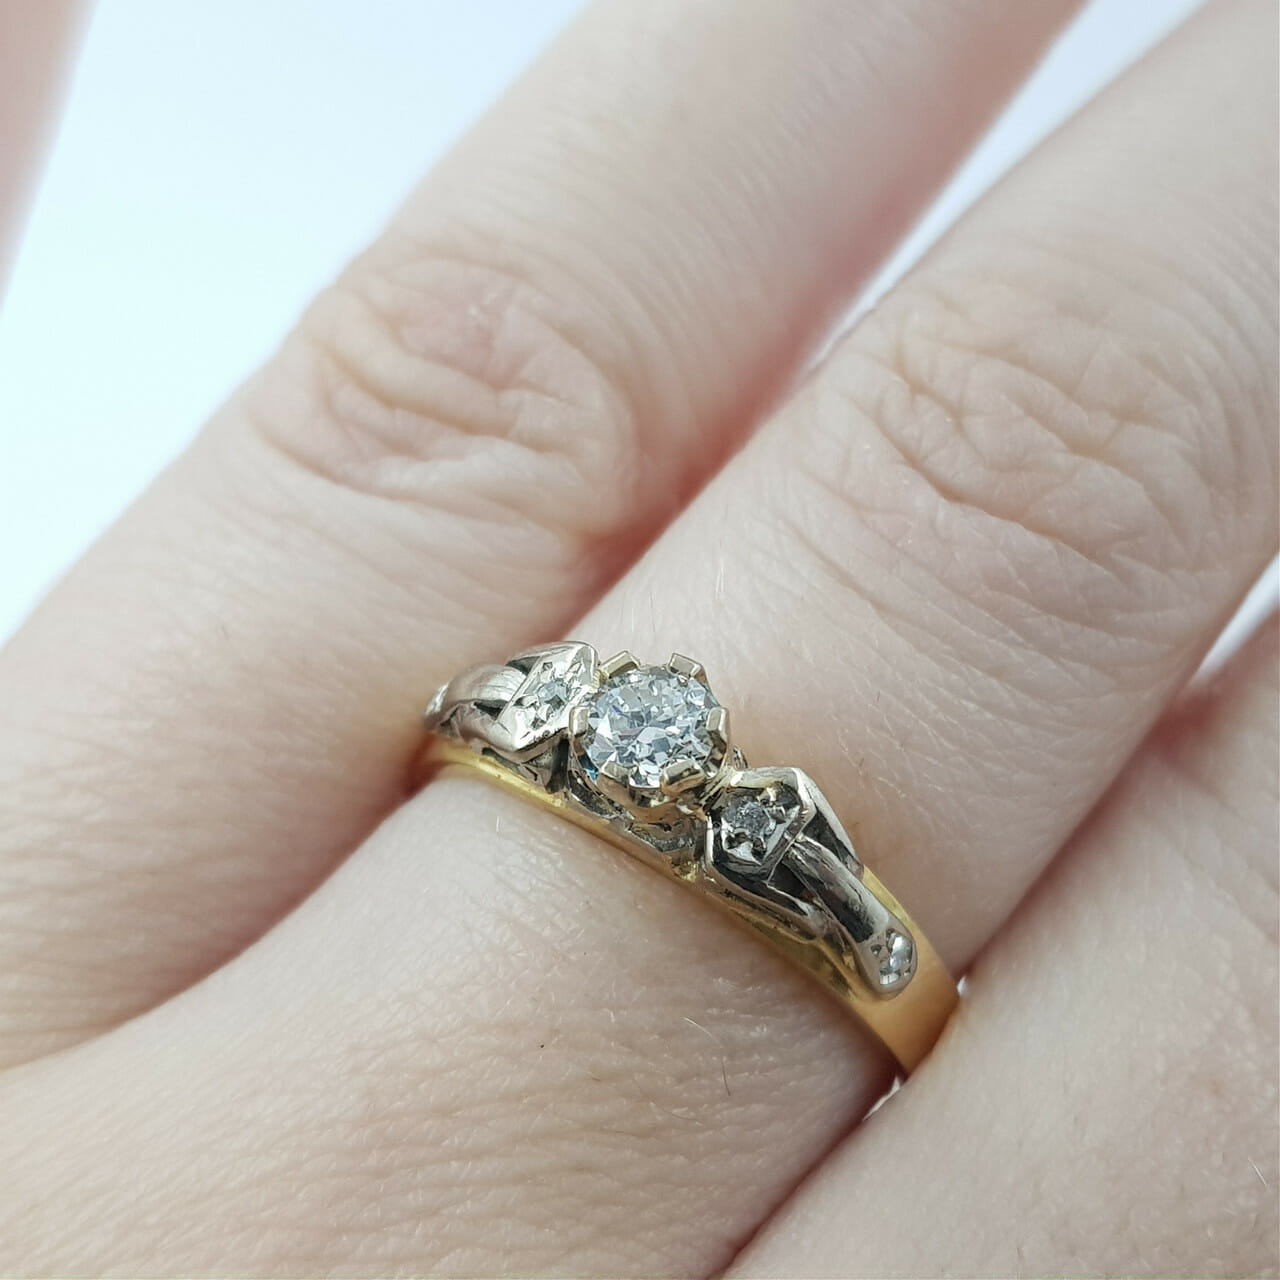 18CT TWO TONE GOLD 0.27CT TDW DIAMOND RING VAL $3150 SIZE Q #41862